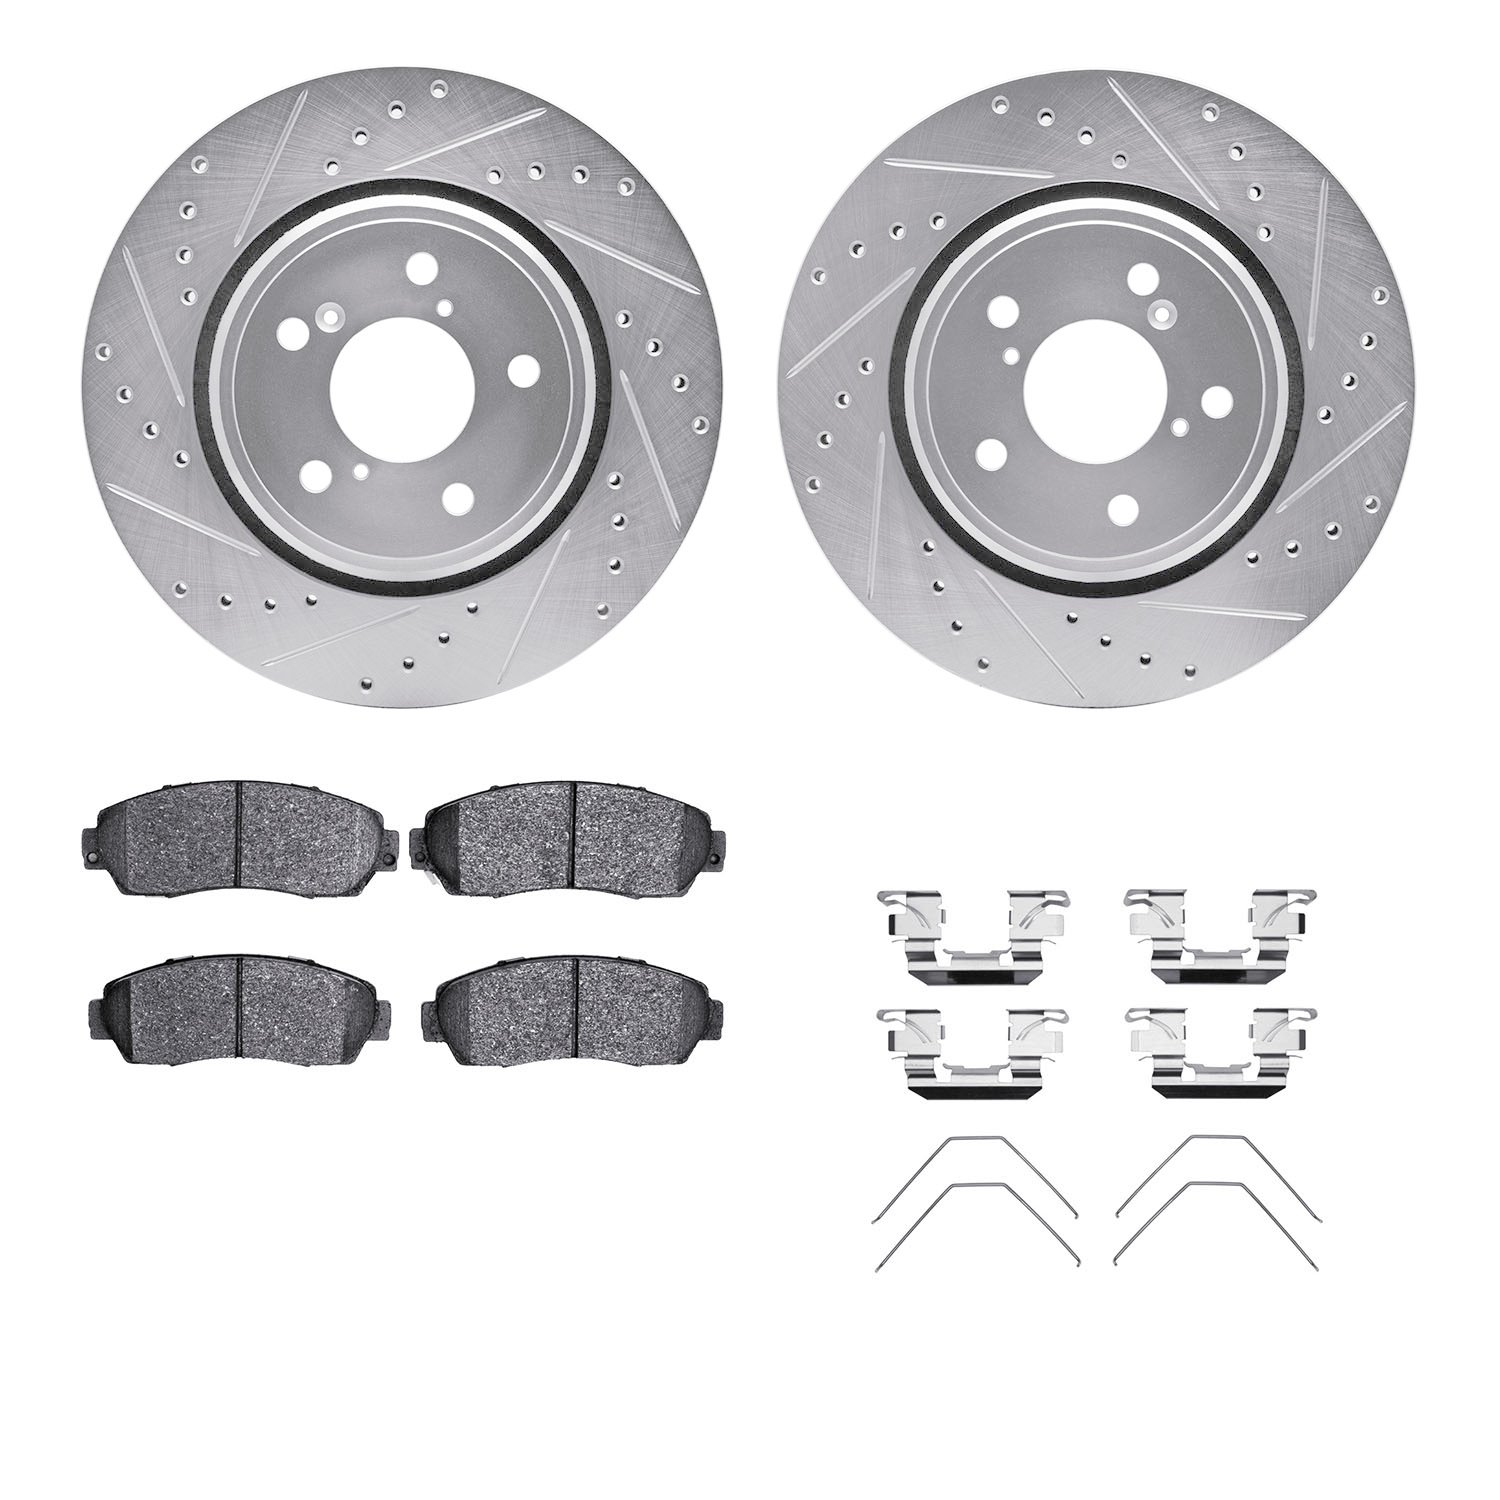 7312-59087 Drilled/Slotted Brake Rotor with 3000-Series Ceramic Brake Pads Kit & Hardware [Silver], Fits Select Acura/Honda, Pos